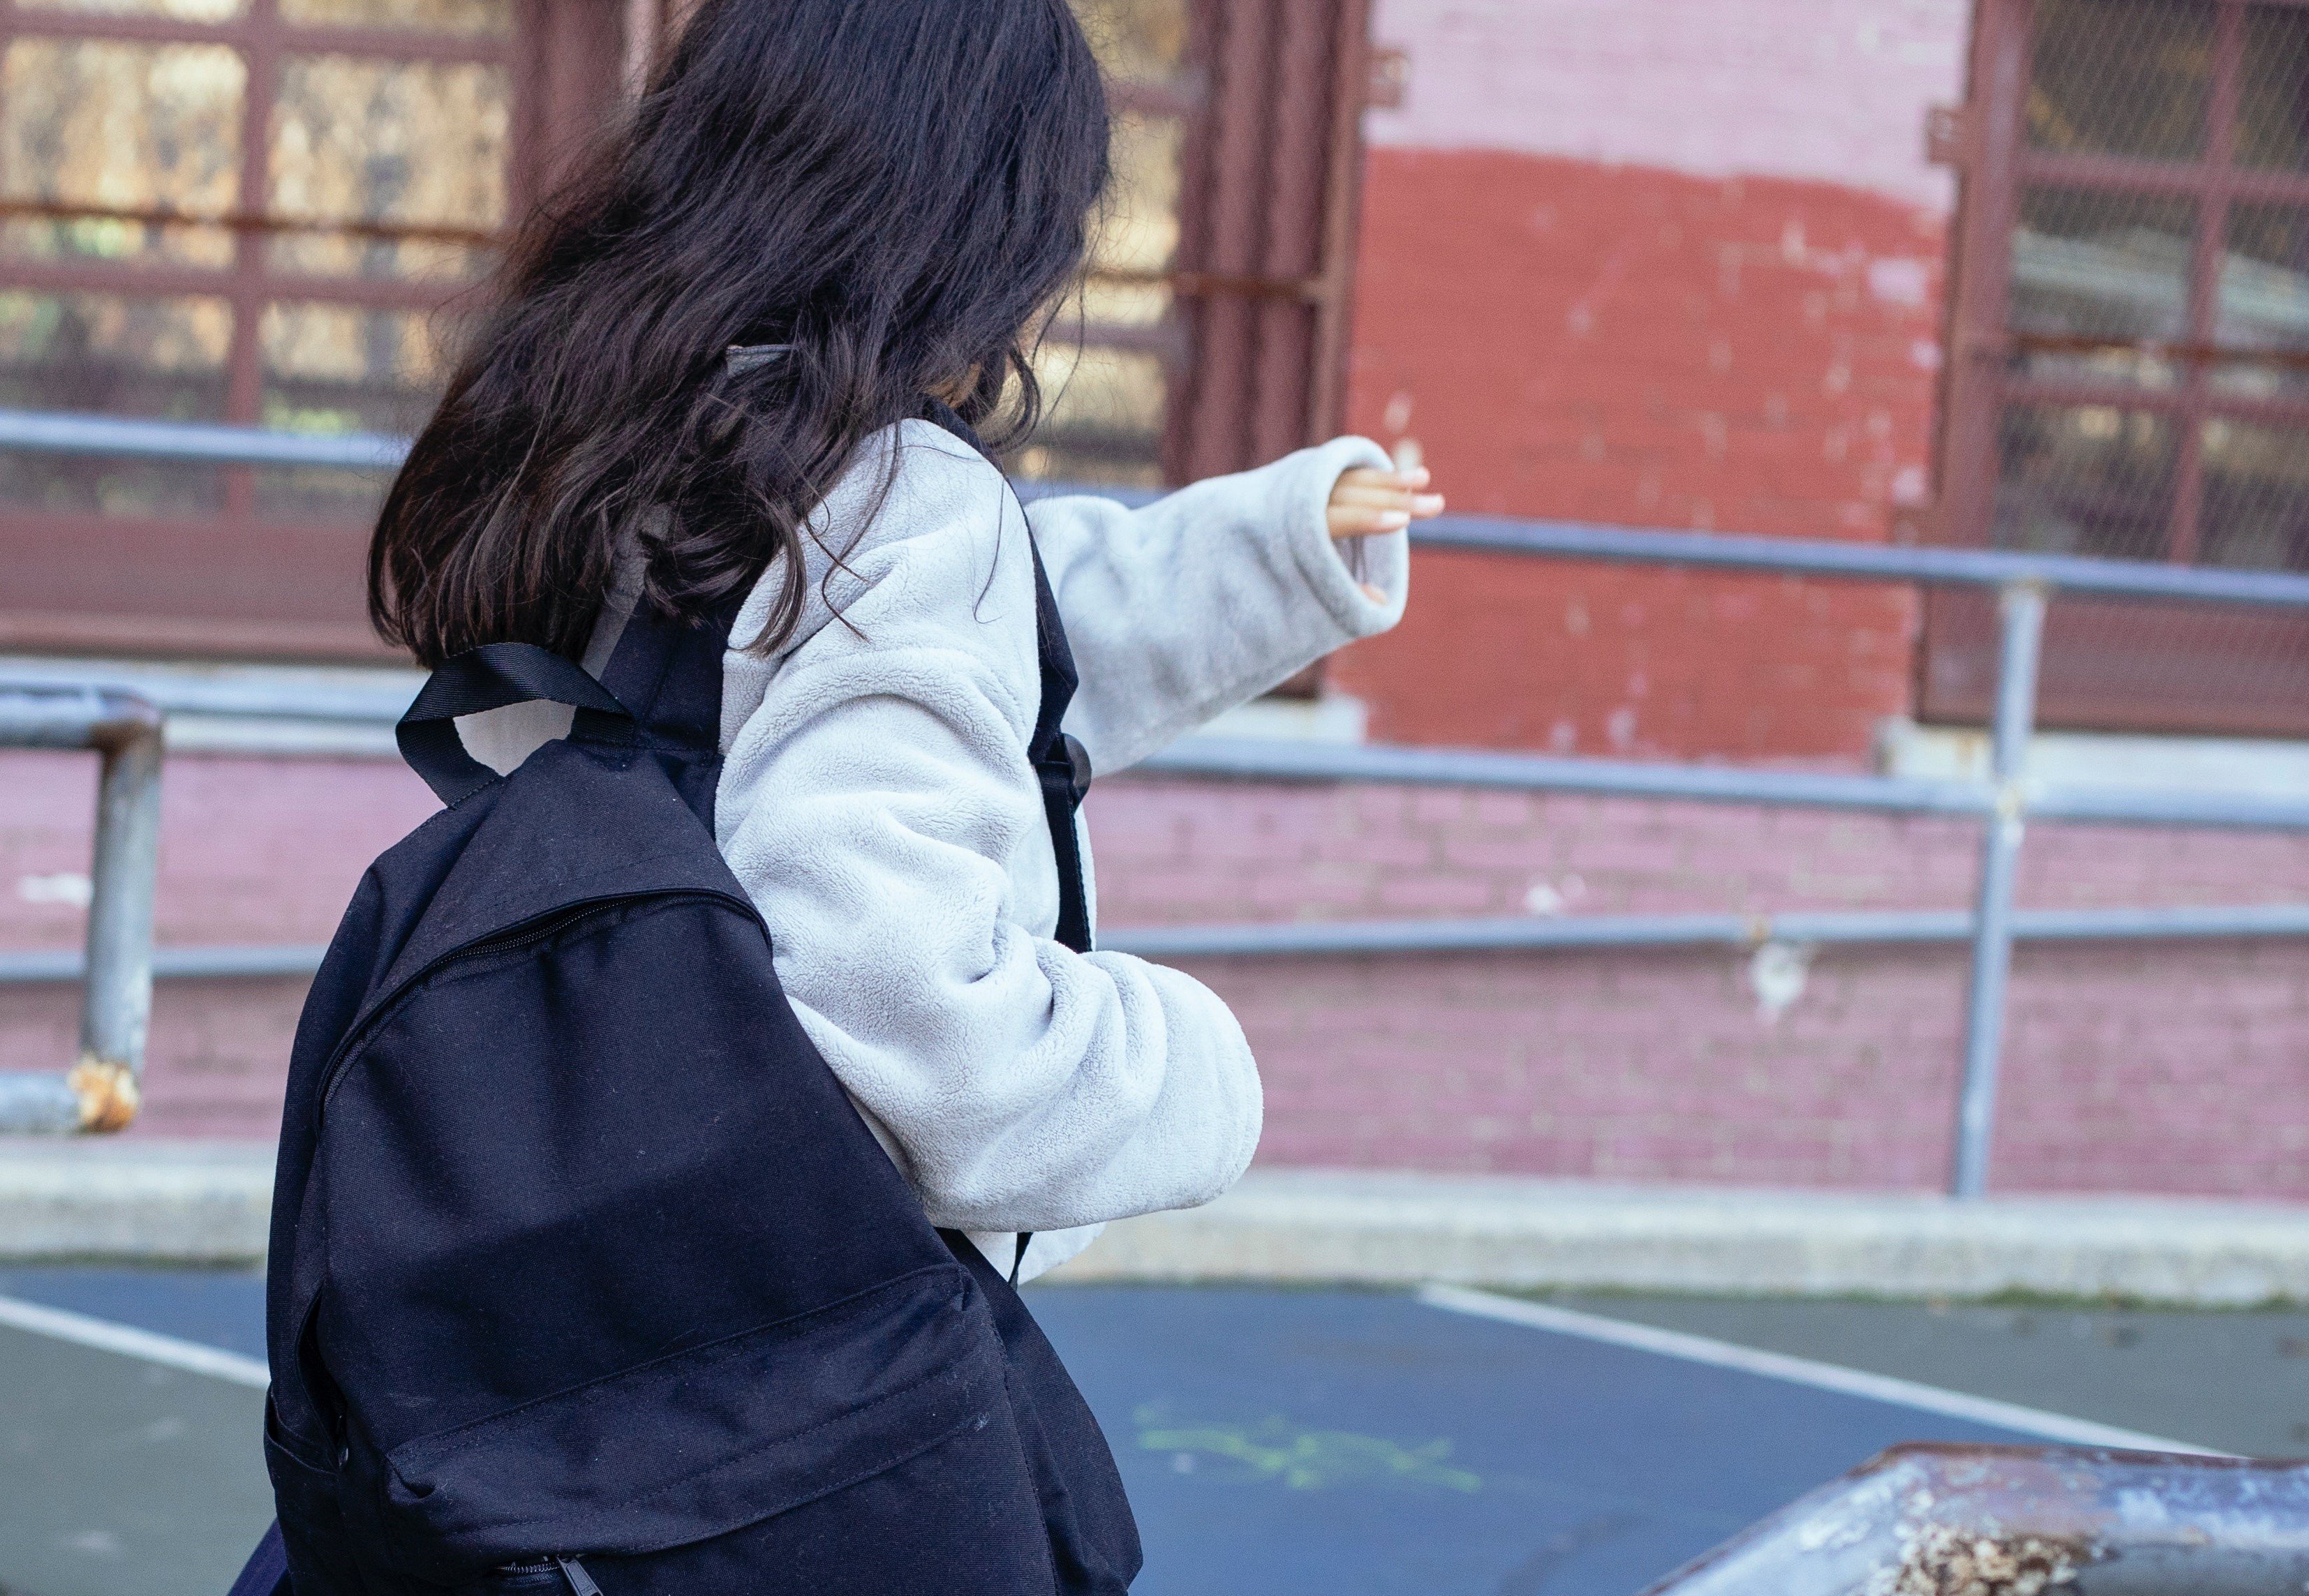 School girl carrying a backpack. | Source: Pexels